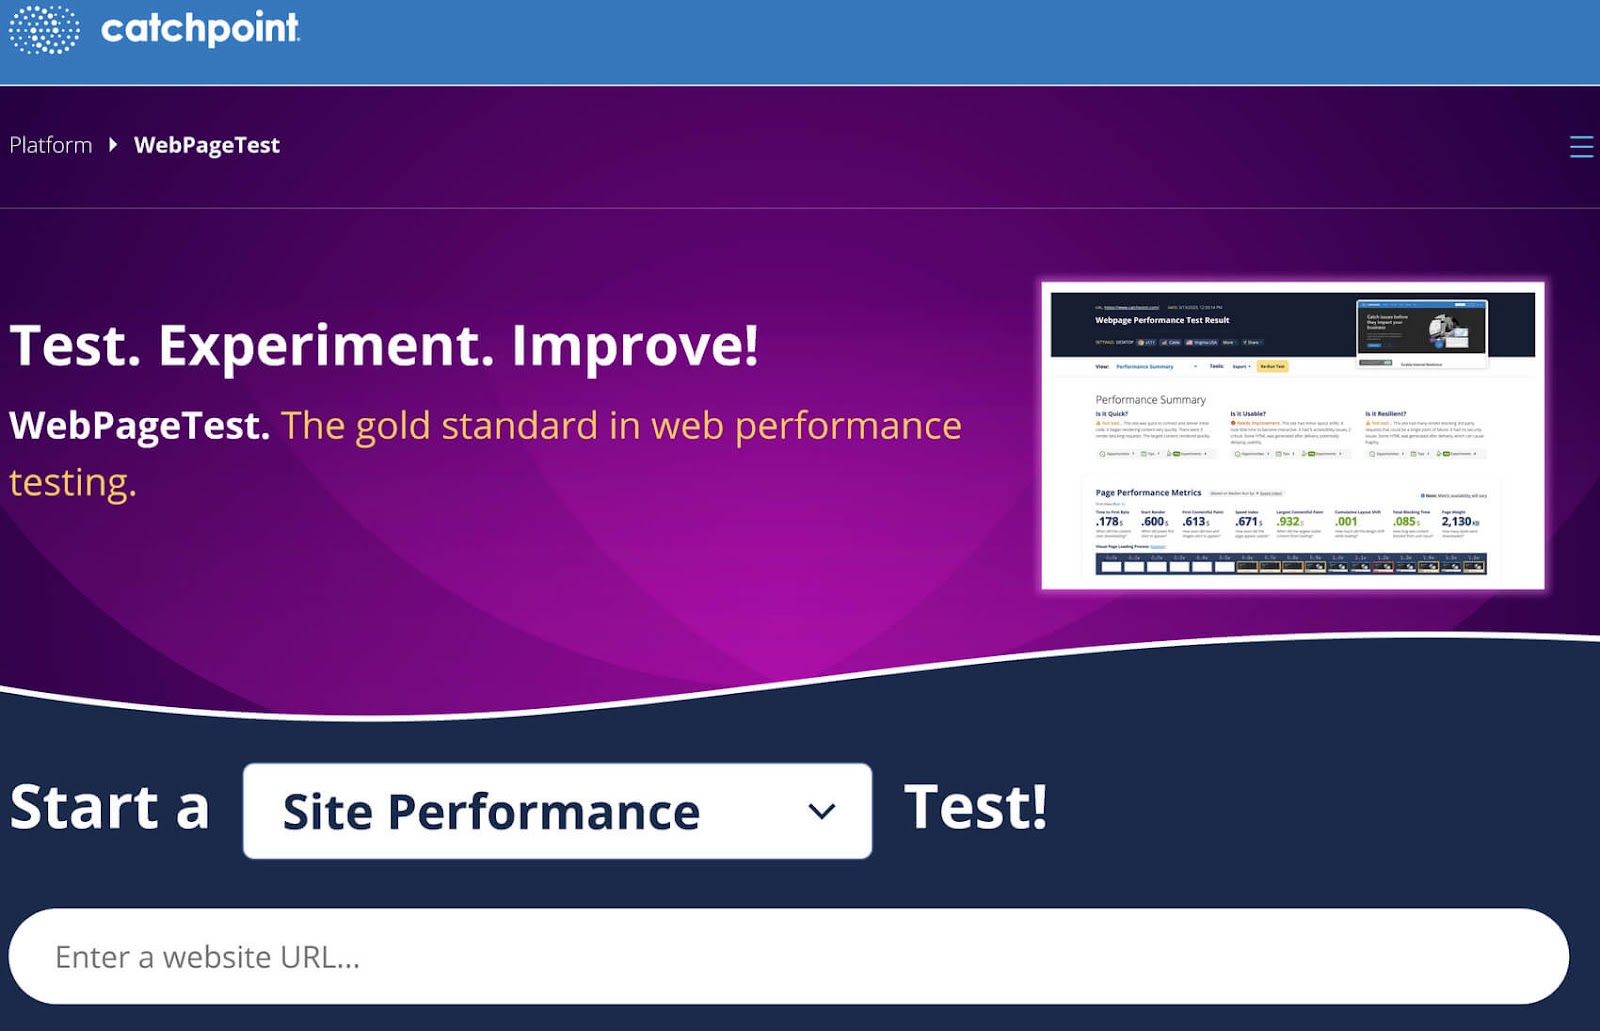 WebPageTest homepage showing a prominent "Start a Site Performance Test" button and a field to enter a website URL.